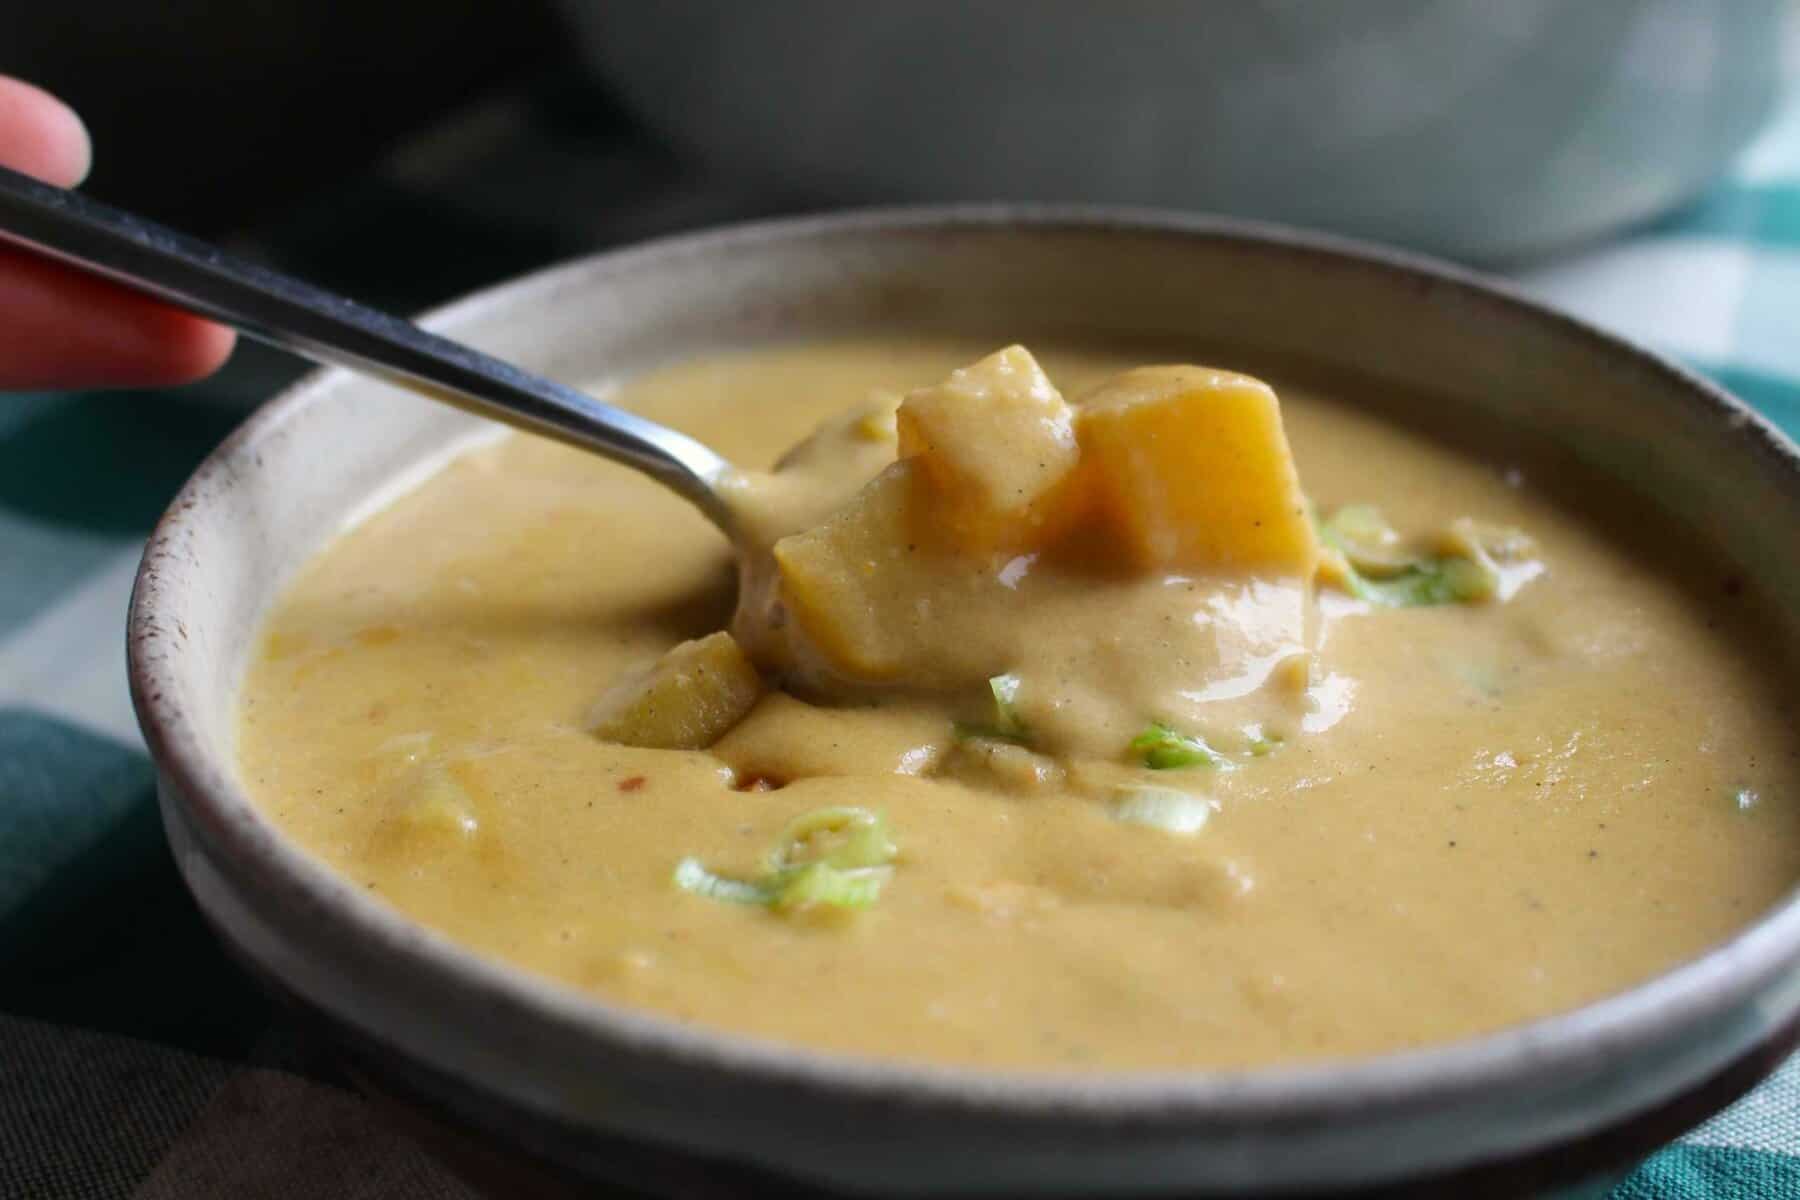  This soup is the perfect comfort food for a cozy night in.